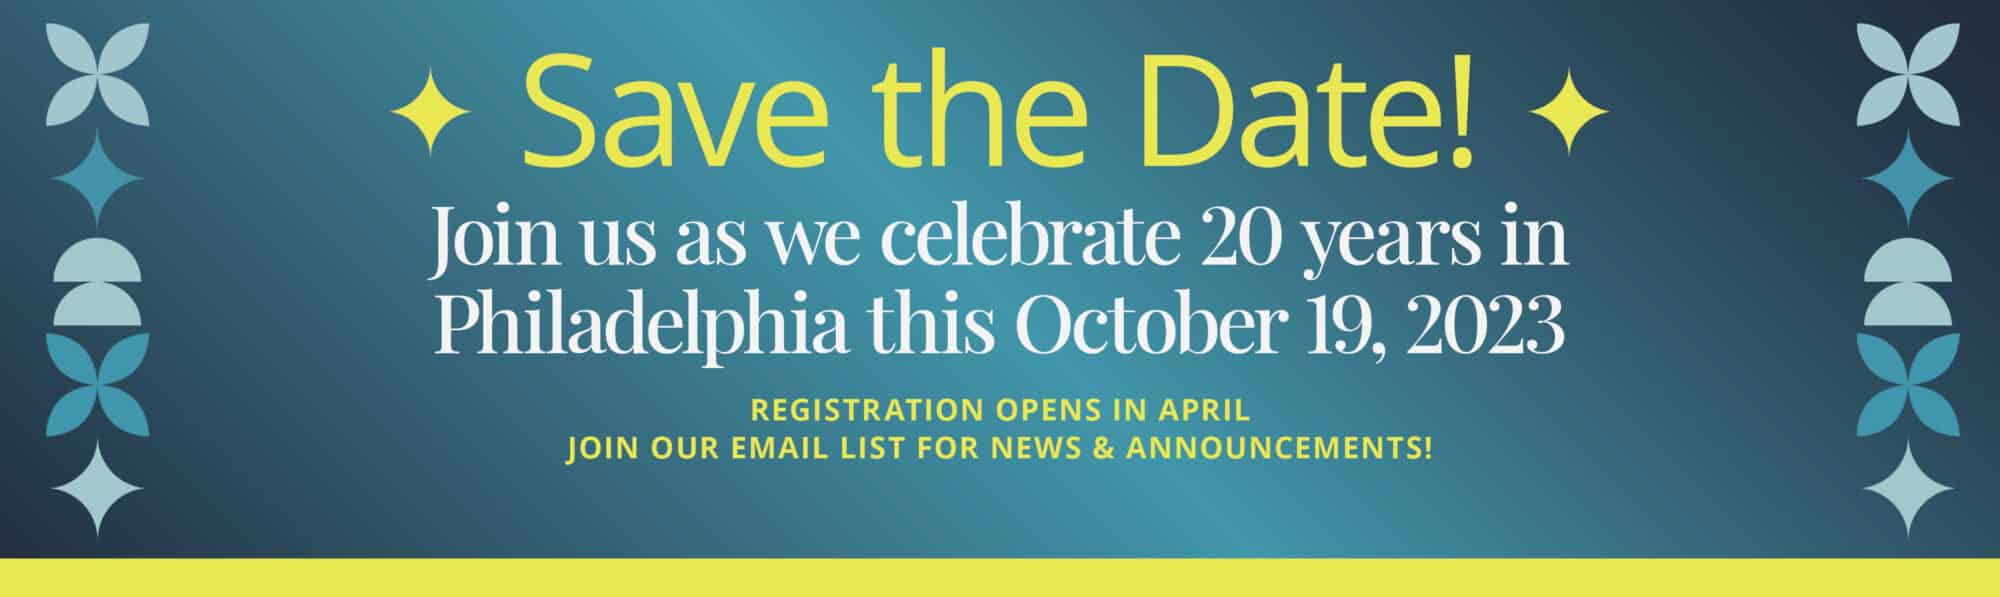 Save the date! Join us as we celebrate 20 years in Philadelphia this October 19, 2023